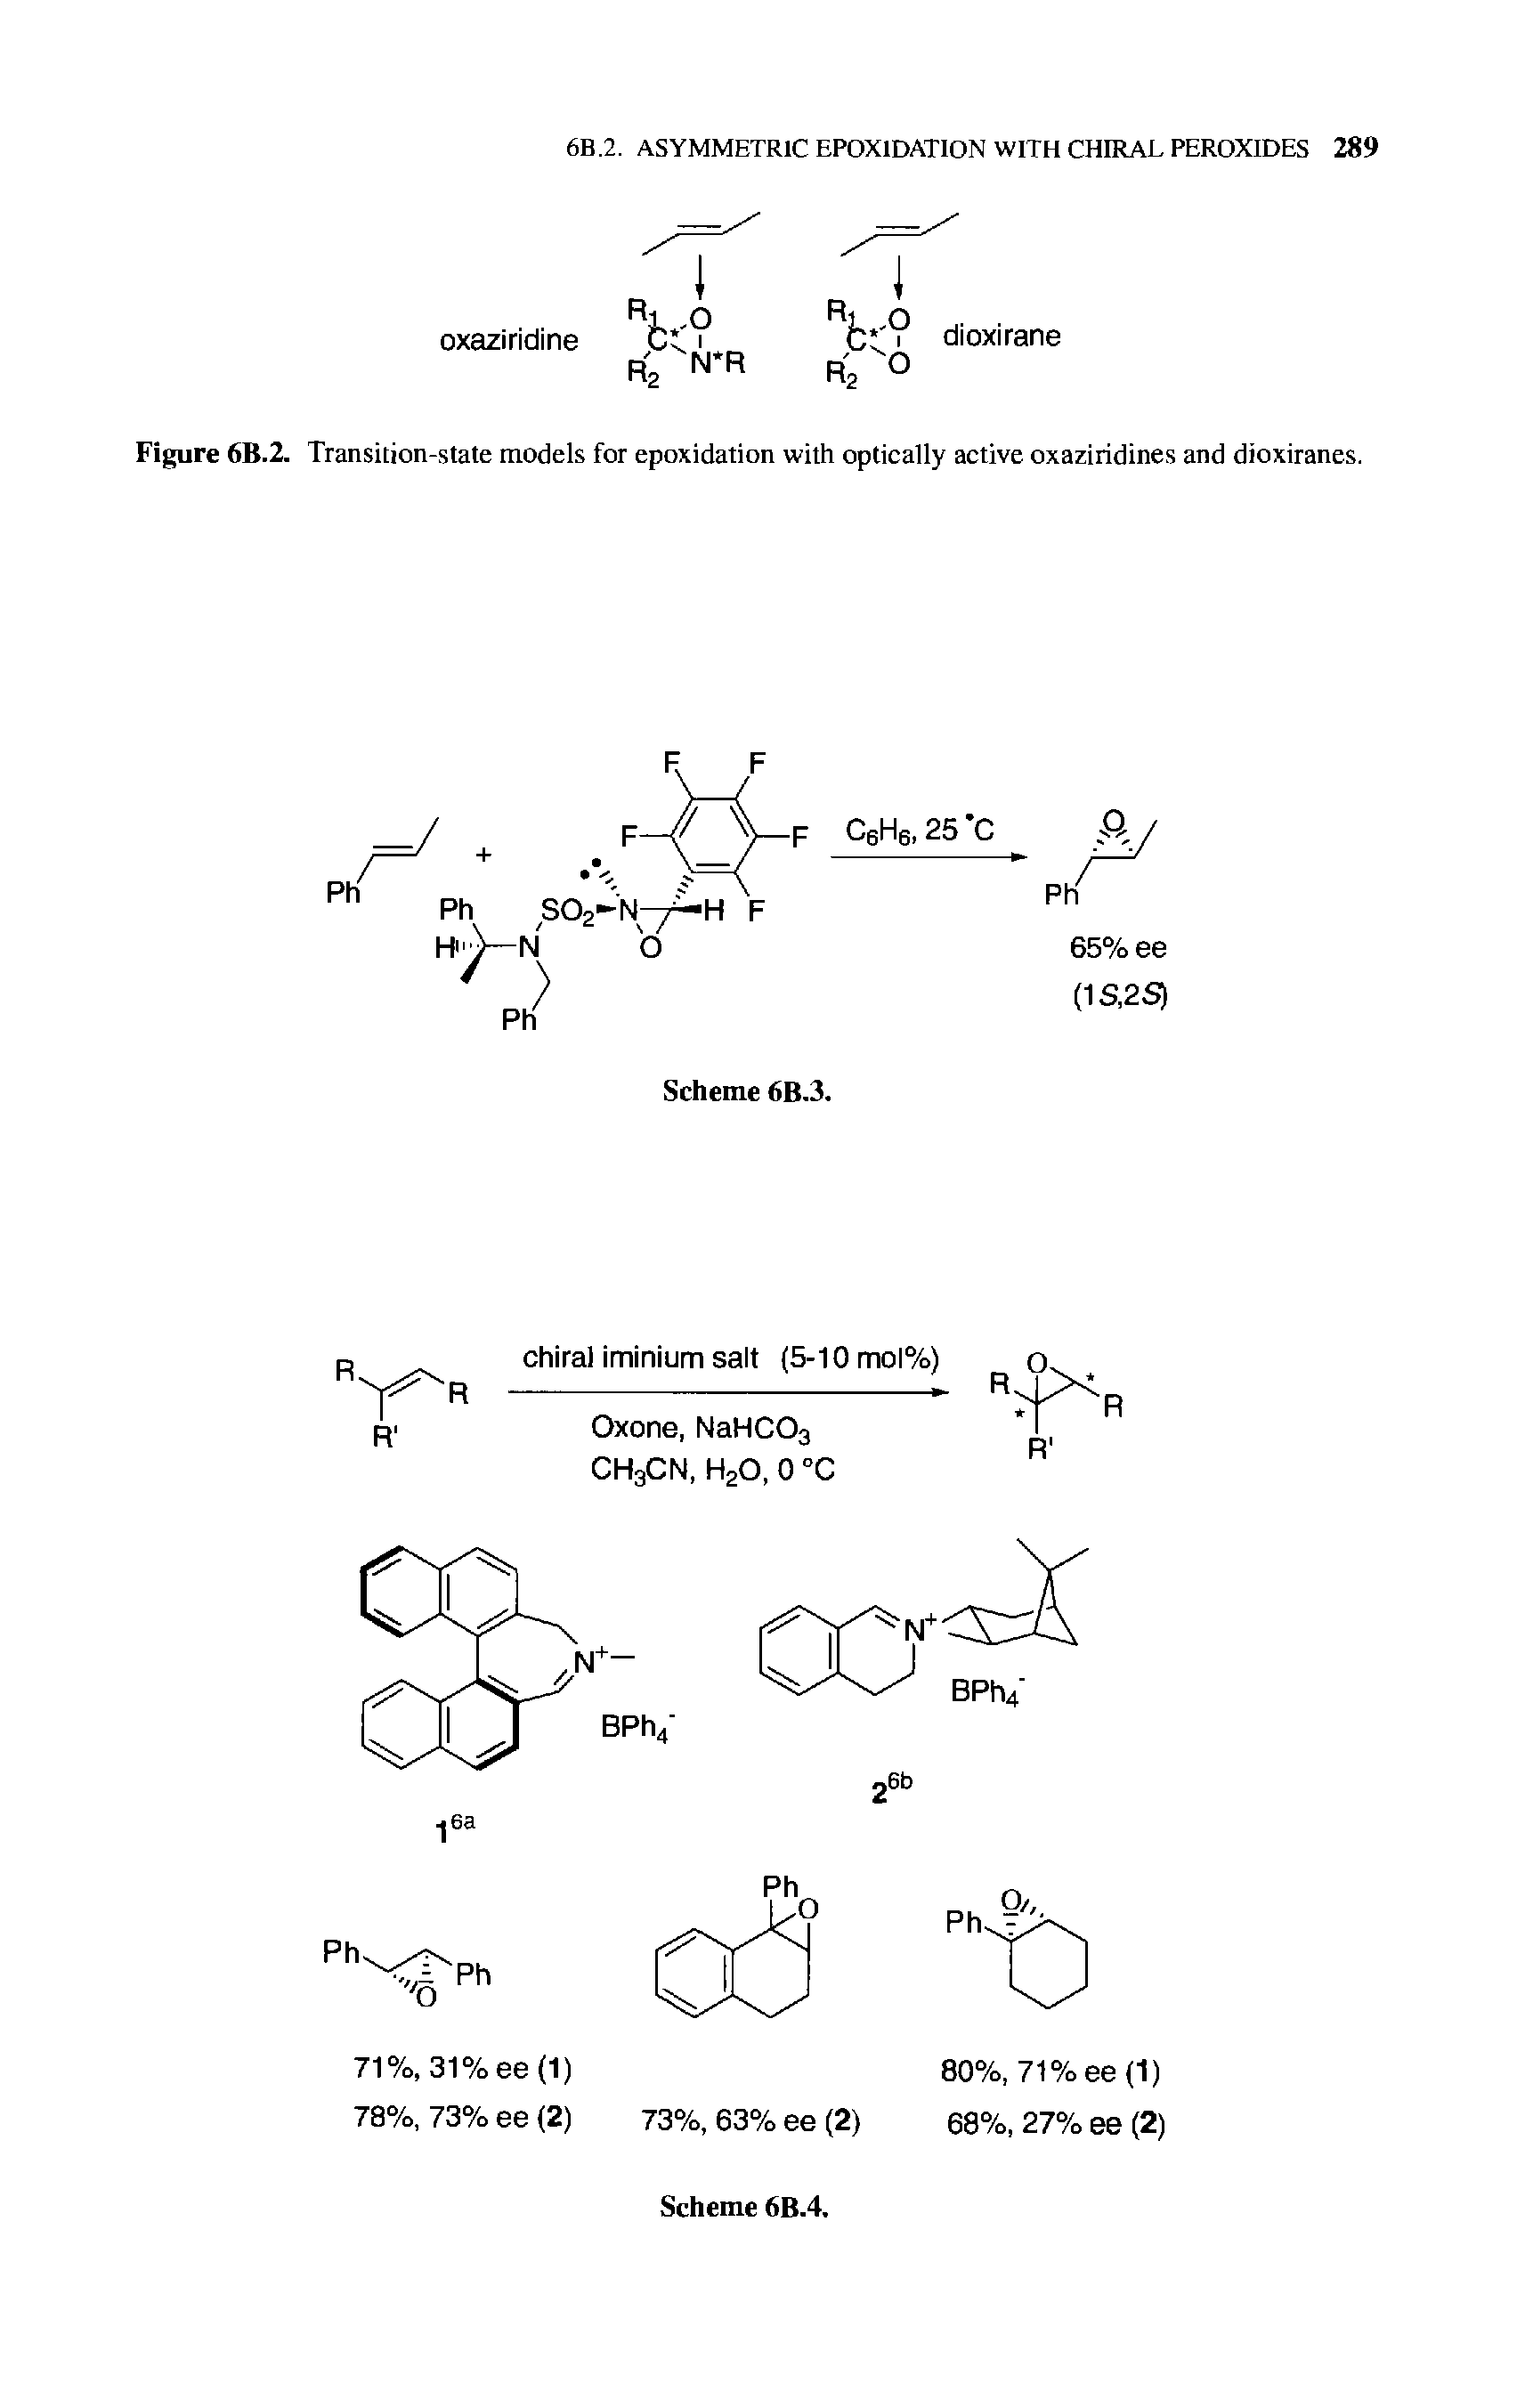 Figure 6B.2. Transition-state models for epoxidation with optically active oxaziridines and dioxiranes.